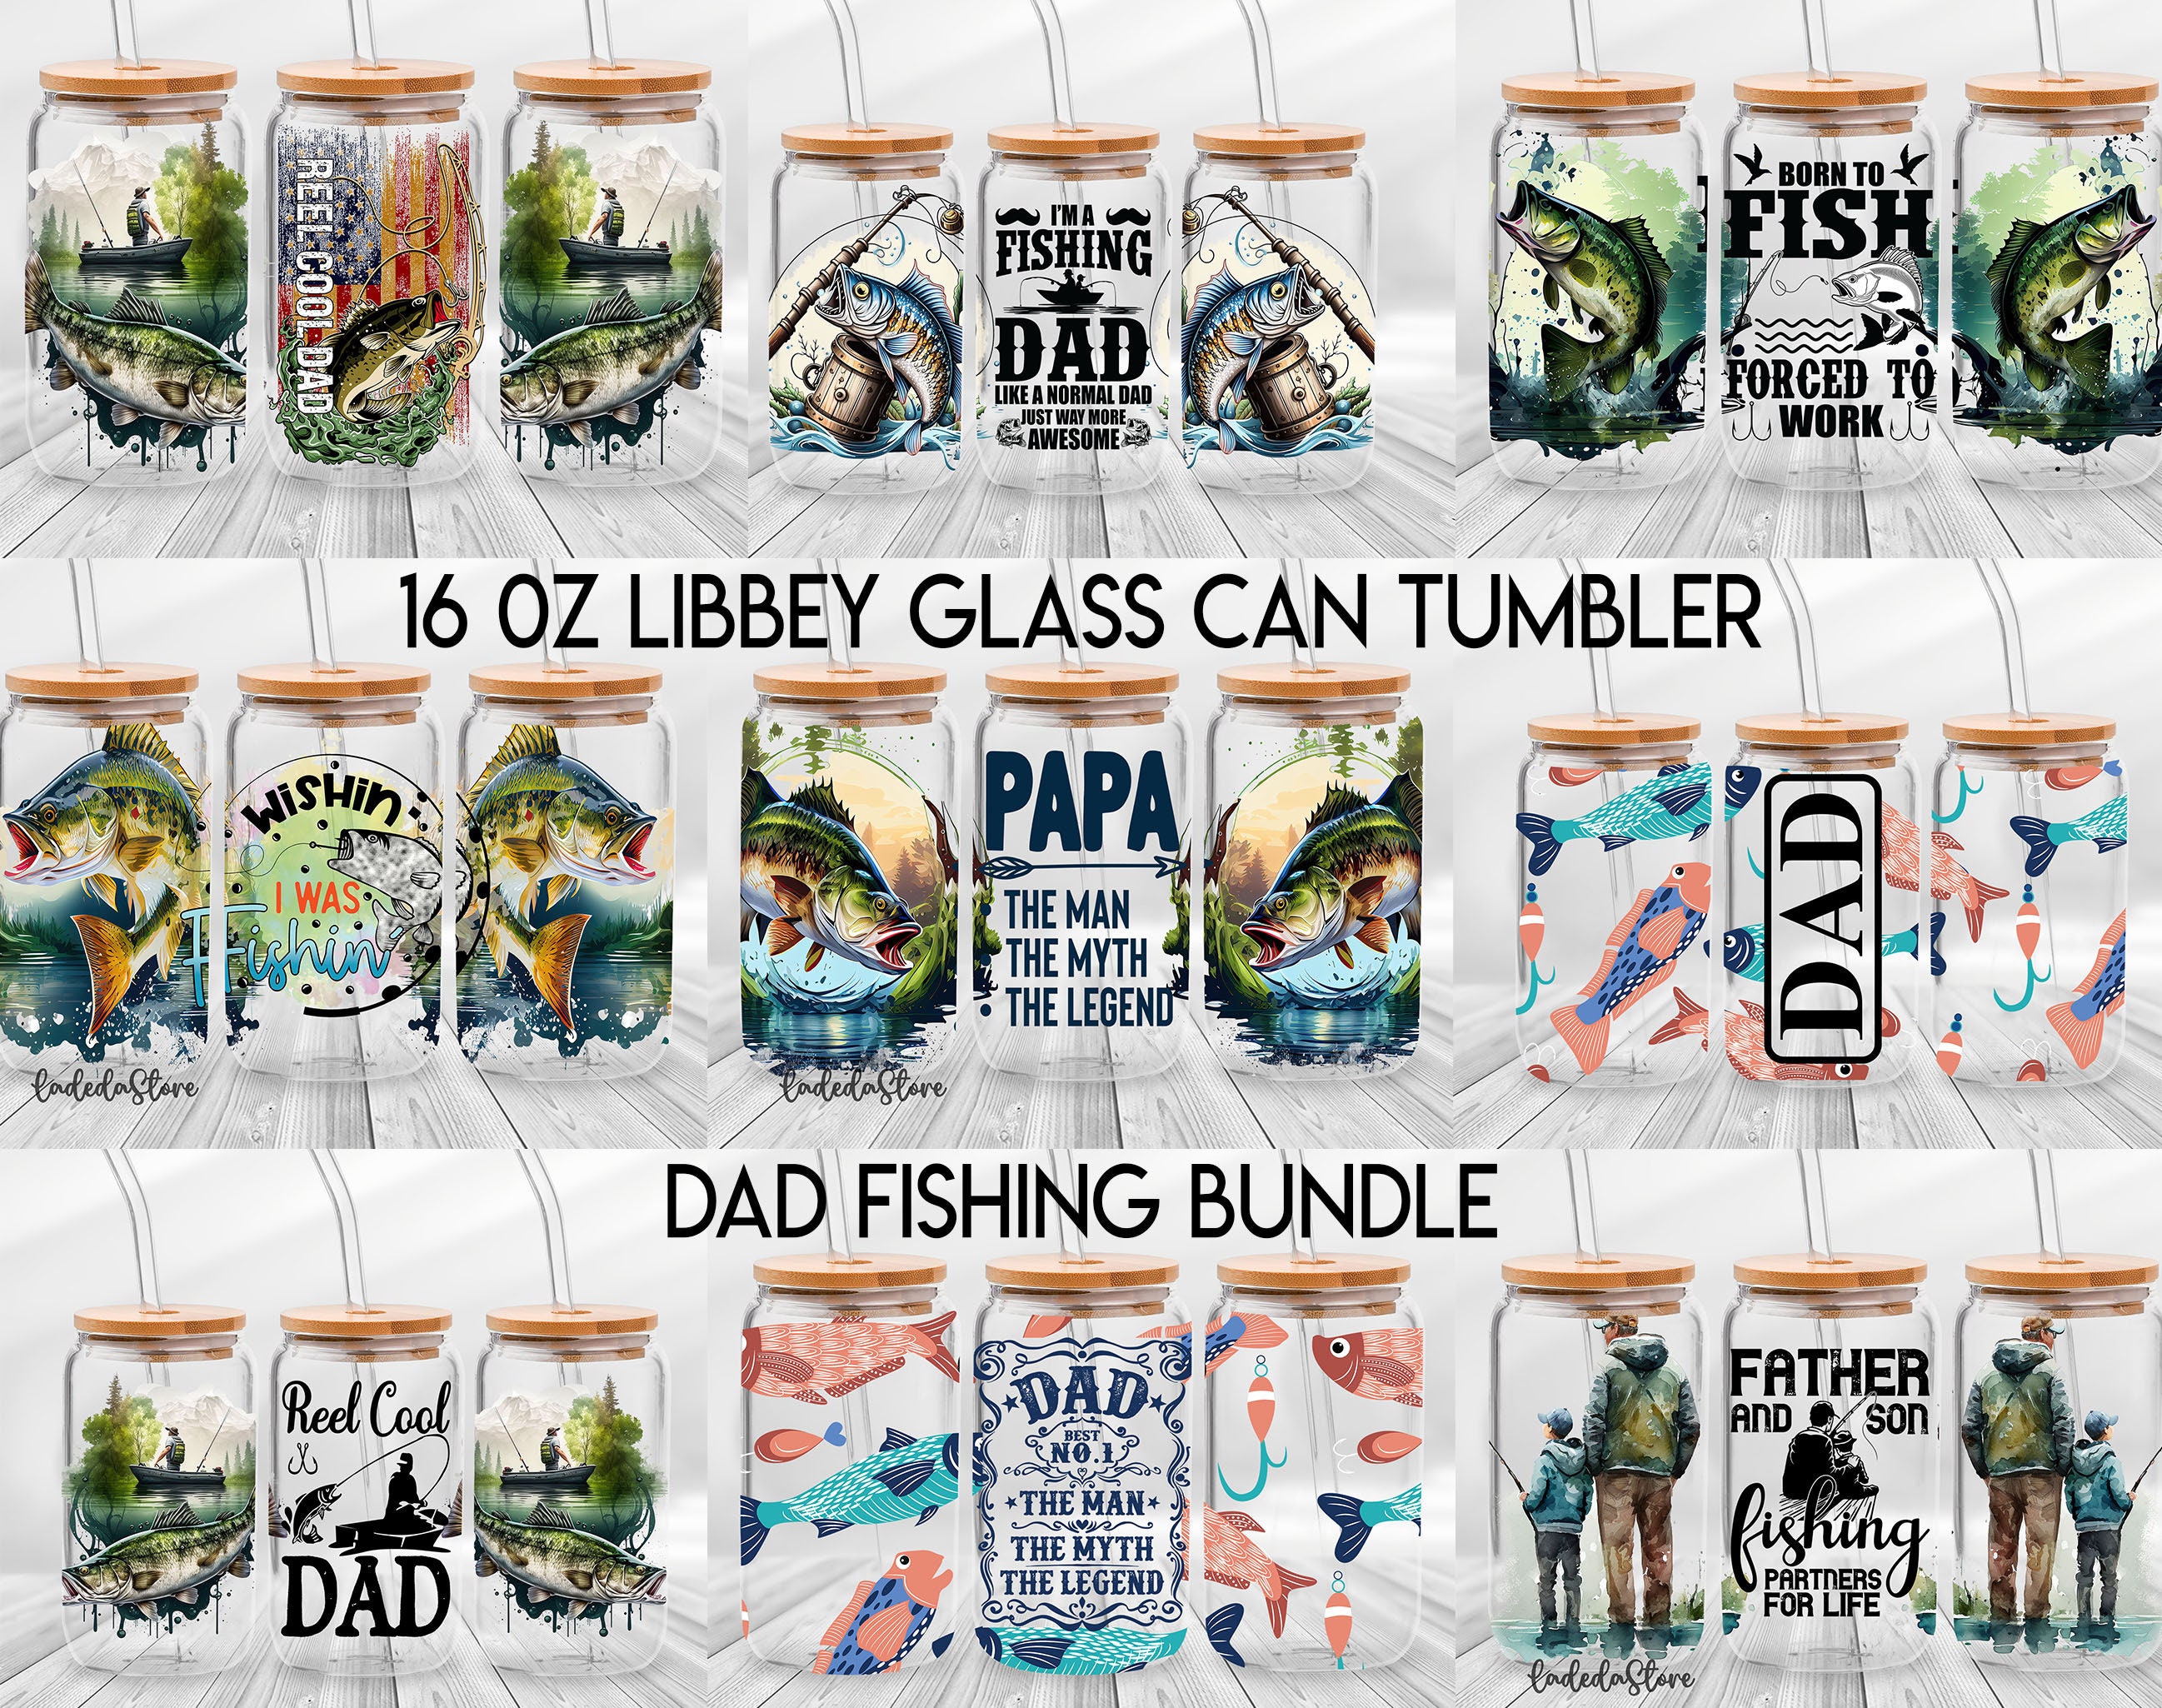 Dad Fishing Glass Libbey Glass Can Wrap, Fishing PaPa The Man The Myth The  Legend, Reel Cool Dad - Born To Fish Forced To Work